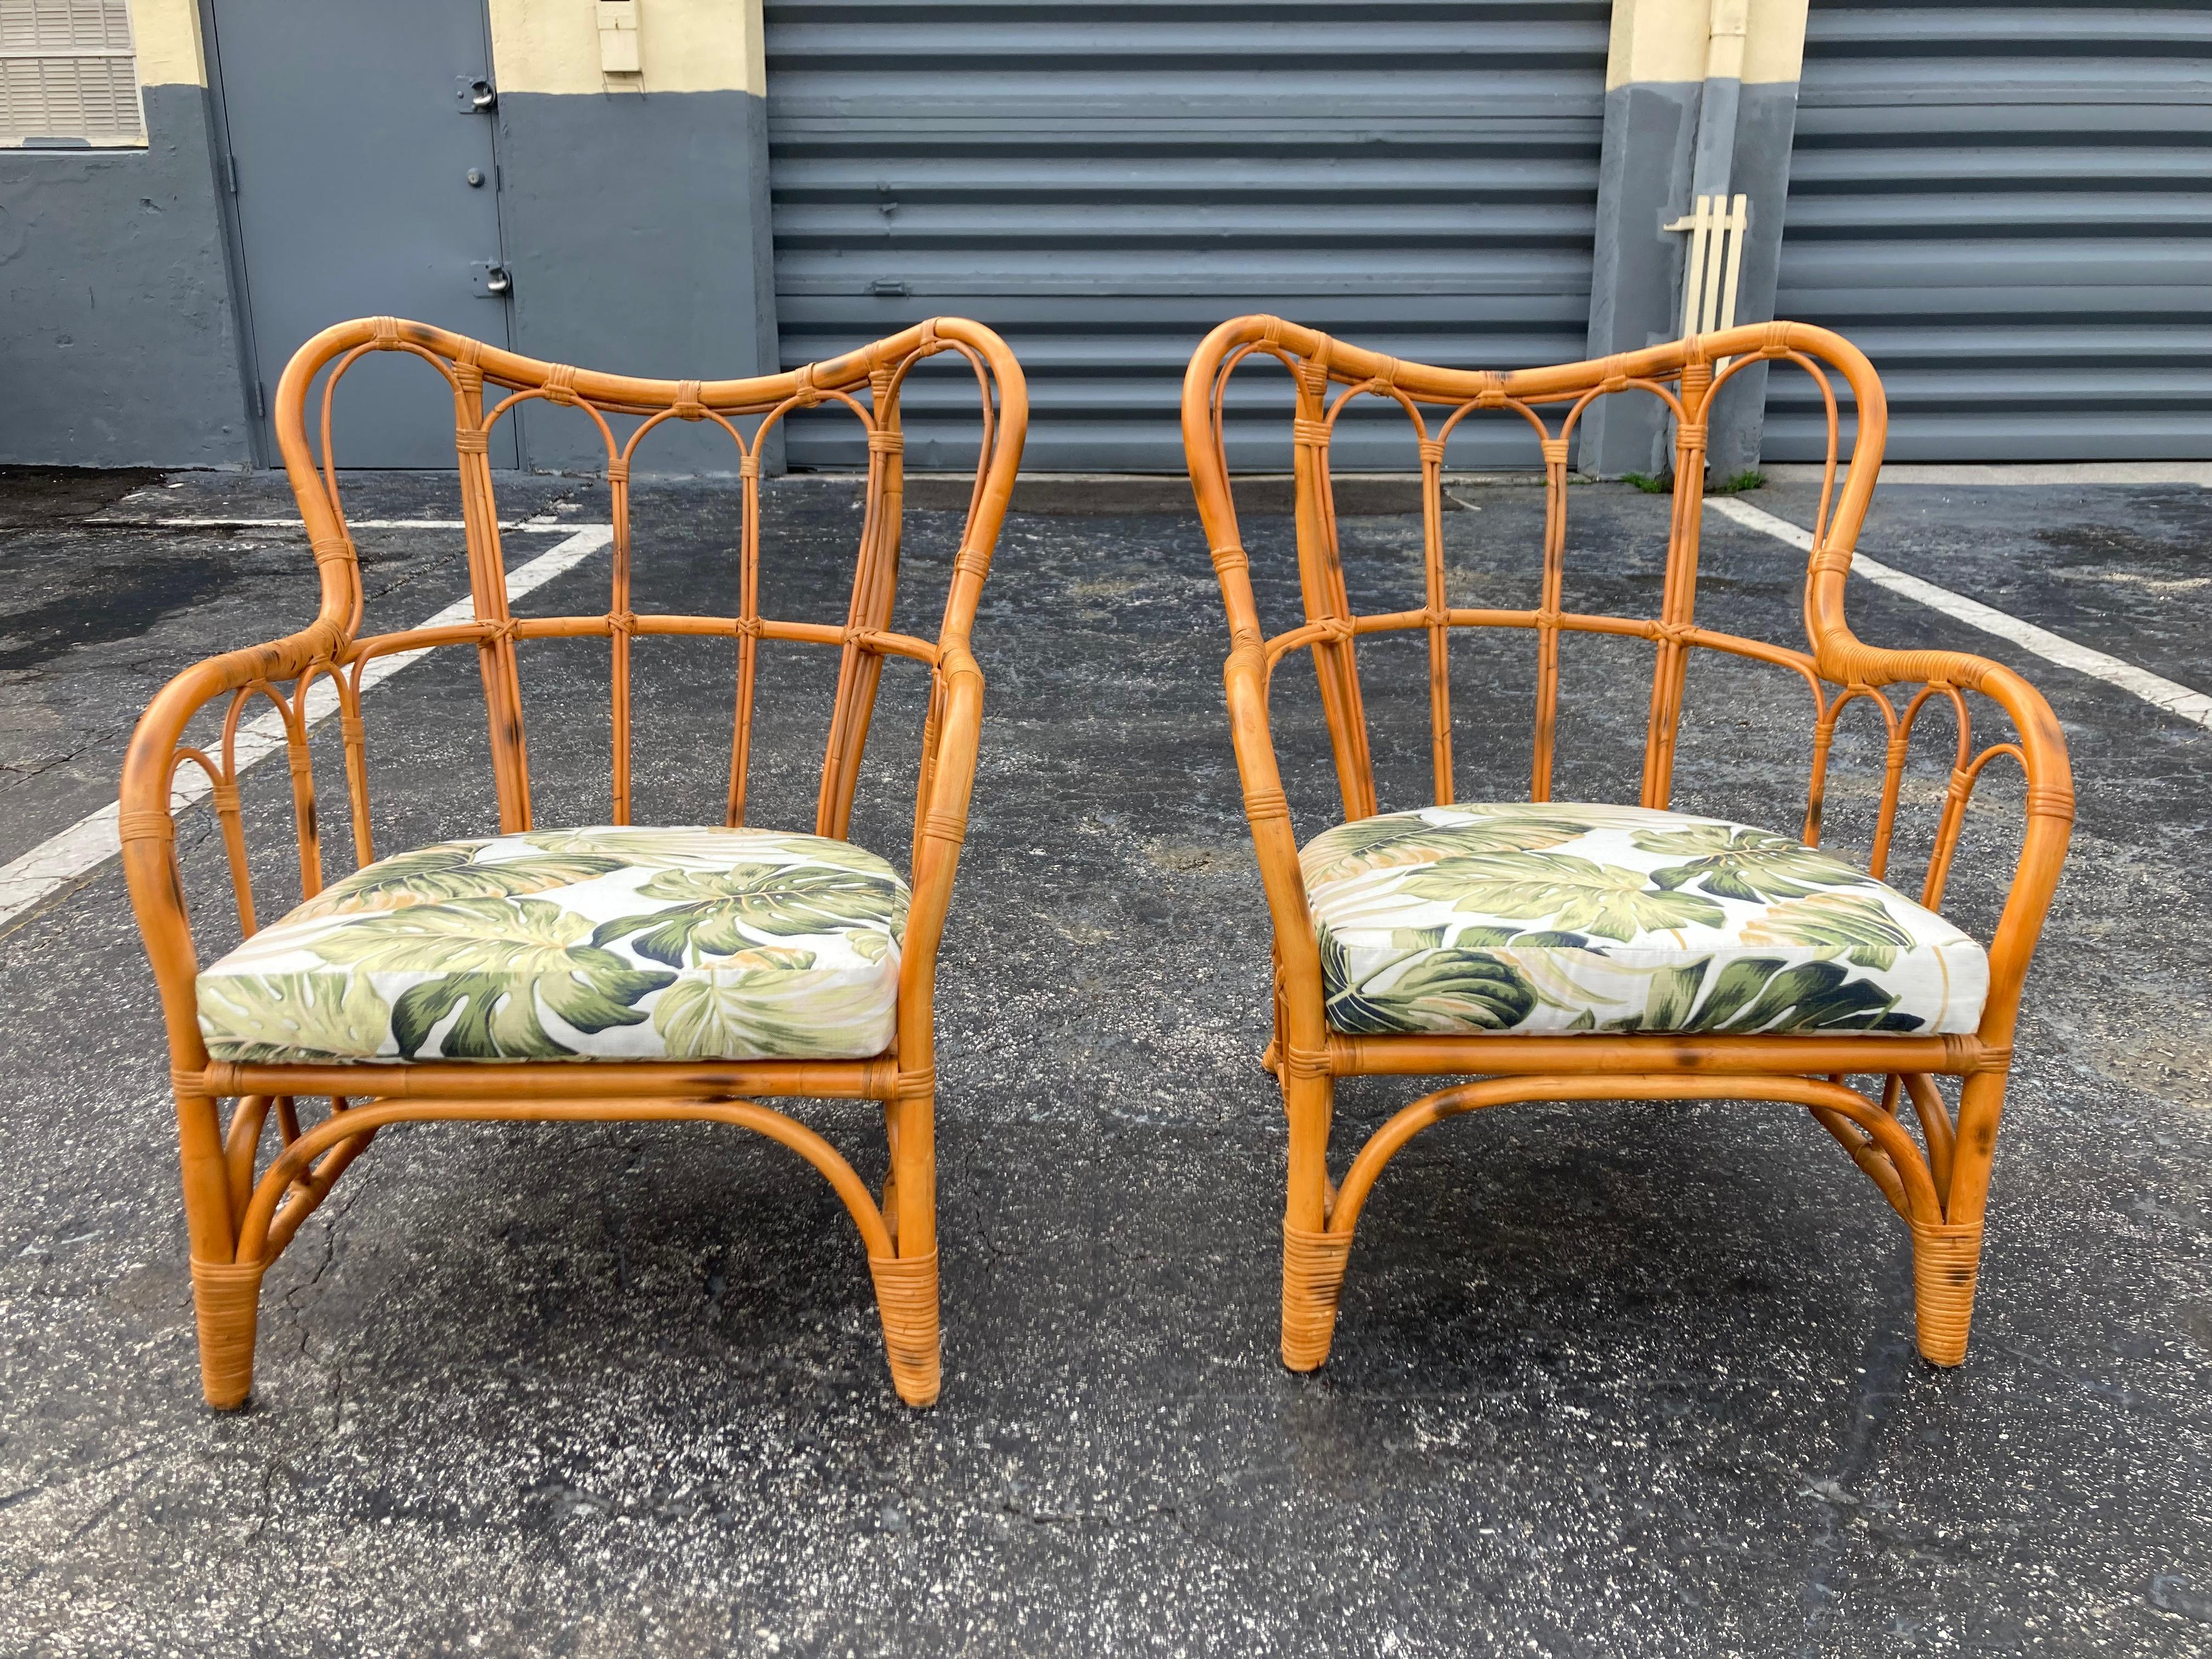 Pair of Rattan Lounge Chairs with fabric seats.